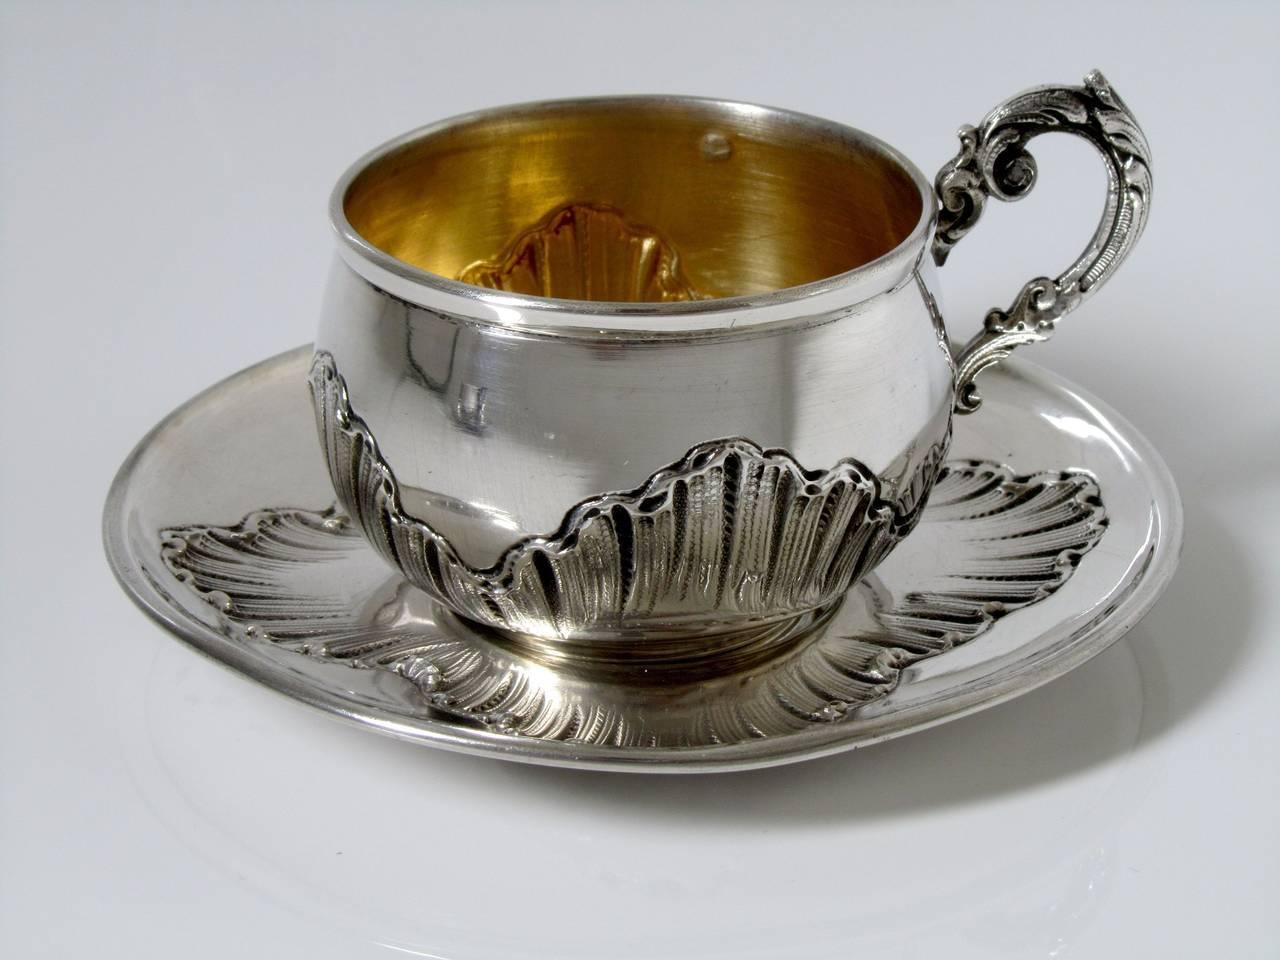 Pair of French Sterling Silver 18k Gold Coffee/Tea Cups w/Saucers Rococo

Head of Minerve 1 st titre for 950/1000 French sterling silver vermeil guarantee. The quality of the gold used to recover sterling silver is a minimum of 750 mils